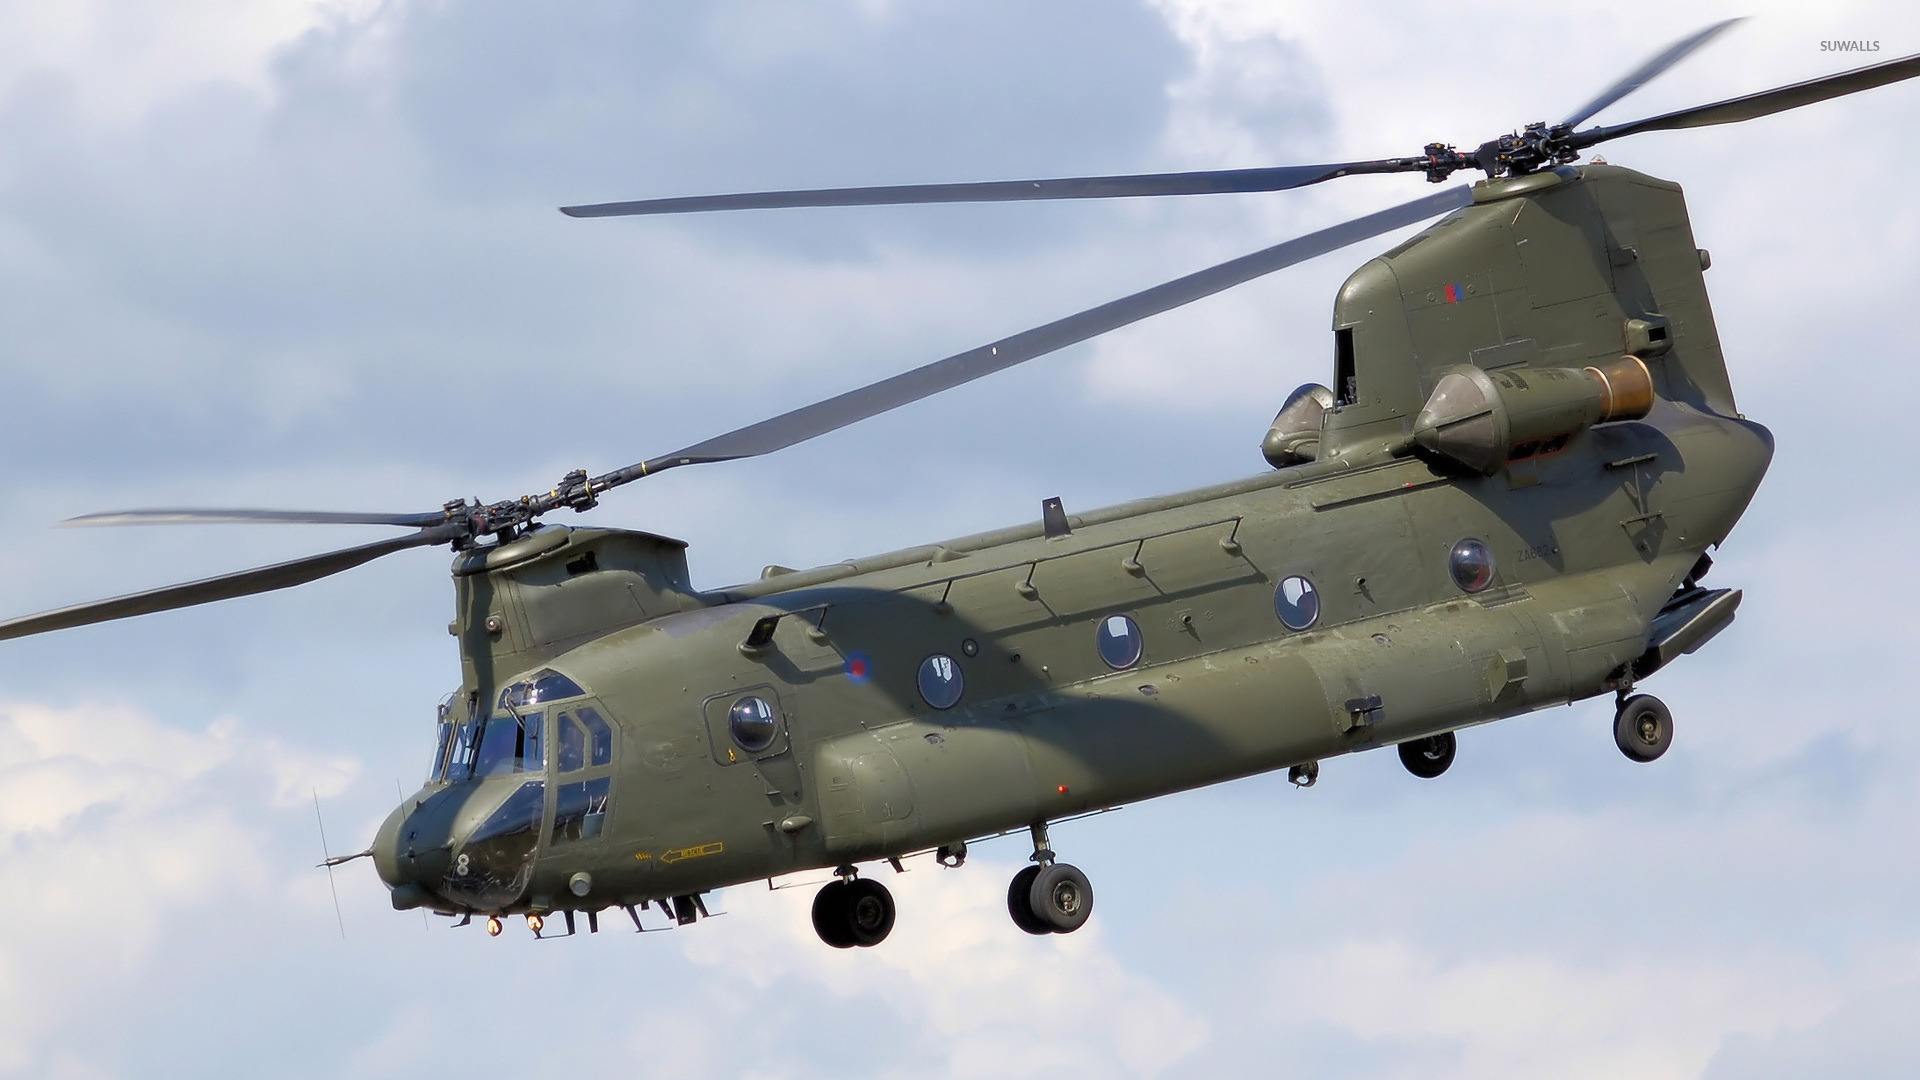 Boeing Ch 47 Chinook Heavy Lift Helicopter Wallpaper Aircraft Images, Photos, Reviews